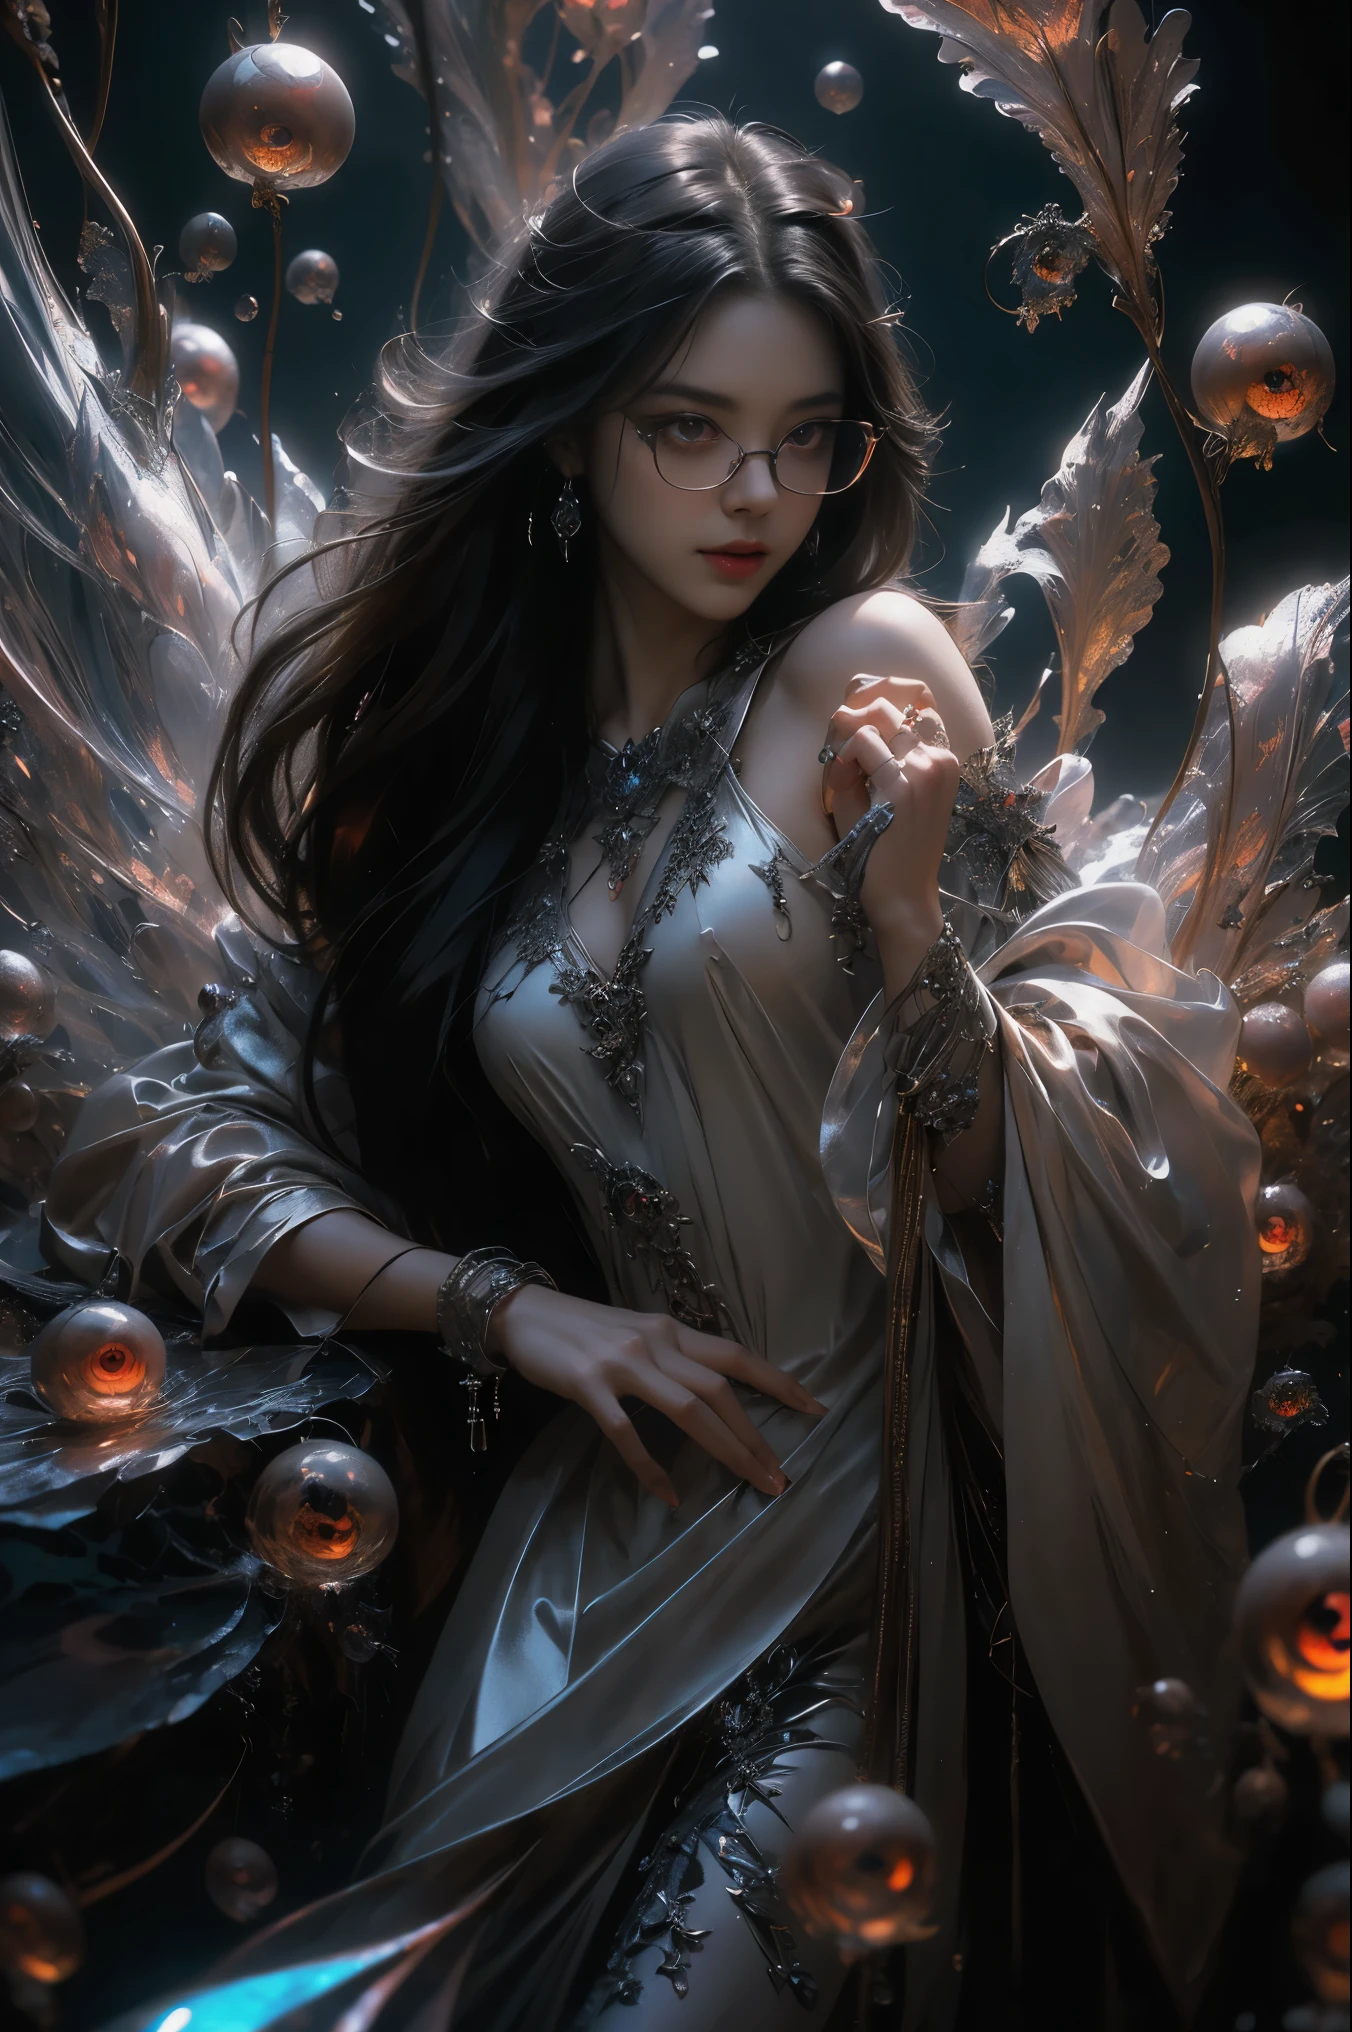 (The best illustrations)、realisitic、ultra-detailliert、The best lighting、Best Shadows、alluring succubus, ethereal beauty, perched on a cloud, (fantasy illustration:1.3), enchanting gaze, captivating pose, delicate wings, otherworldly charm, mystical sky, (Luis Royo:1.2), (Yoshitaka Amano:1.1), Dungeon and Dragon、caves、Dungeon、 A Necromancer、natta、Dark style、Succubus、Devil's Daughter、Bat Wings，(((Demon Hornlack-rimmed round glasses))))、(red eyes glowing:1.6)、​beautiful countenance、Tindall Effect、(High Detail Skins:1.2) absurderes、Ponytail distortion、jewely、Beautiful expression、Toned waist、Wide buttocks、Tindall Effectmasuter piece、top-quality、Highest Standards、Top image quality、masutepiece、intricate detailes、High resolution、Depth Field、natural soft light、profetional lighting、Great smile、(High Detail Skin: 1.2)、photorealistic anime girl render、Strong highlights of the eyes、Perfect Anatomy、crotch open、Shy、Spreading your legs、Panties are visible、Skirt flipping、Body shiny with oilerectile nipple))、8K resolution、intricate clothing、Intricate details